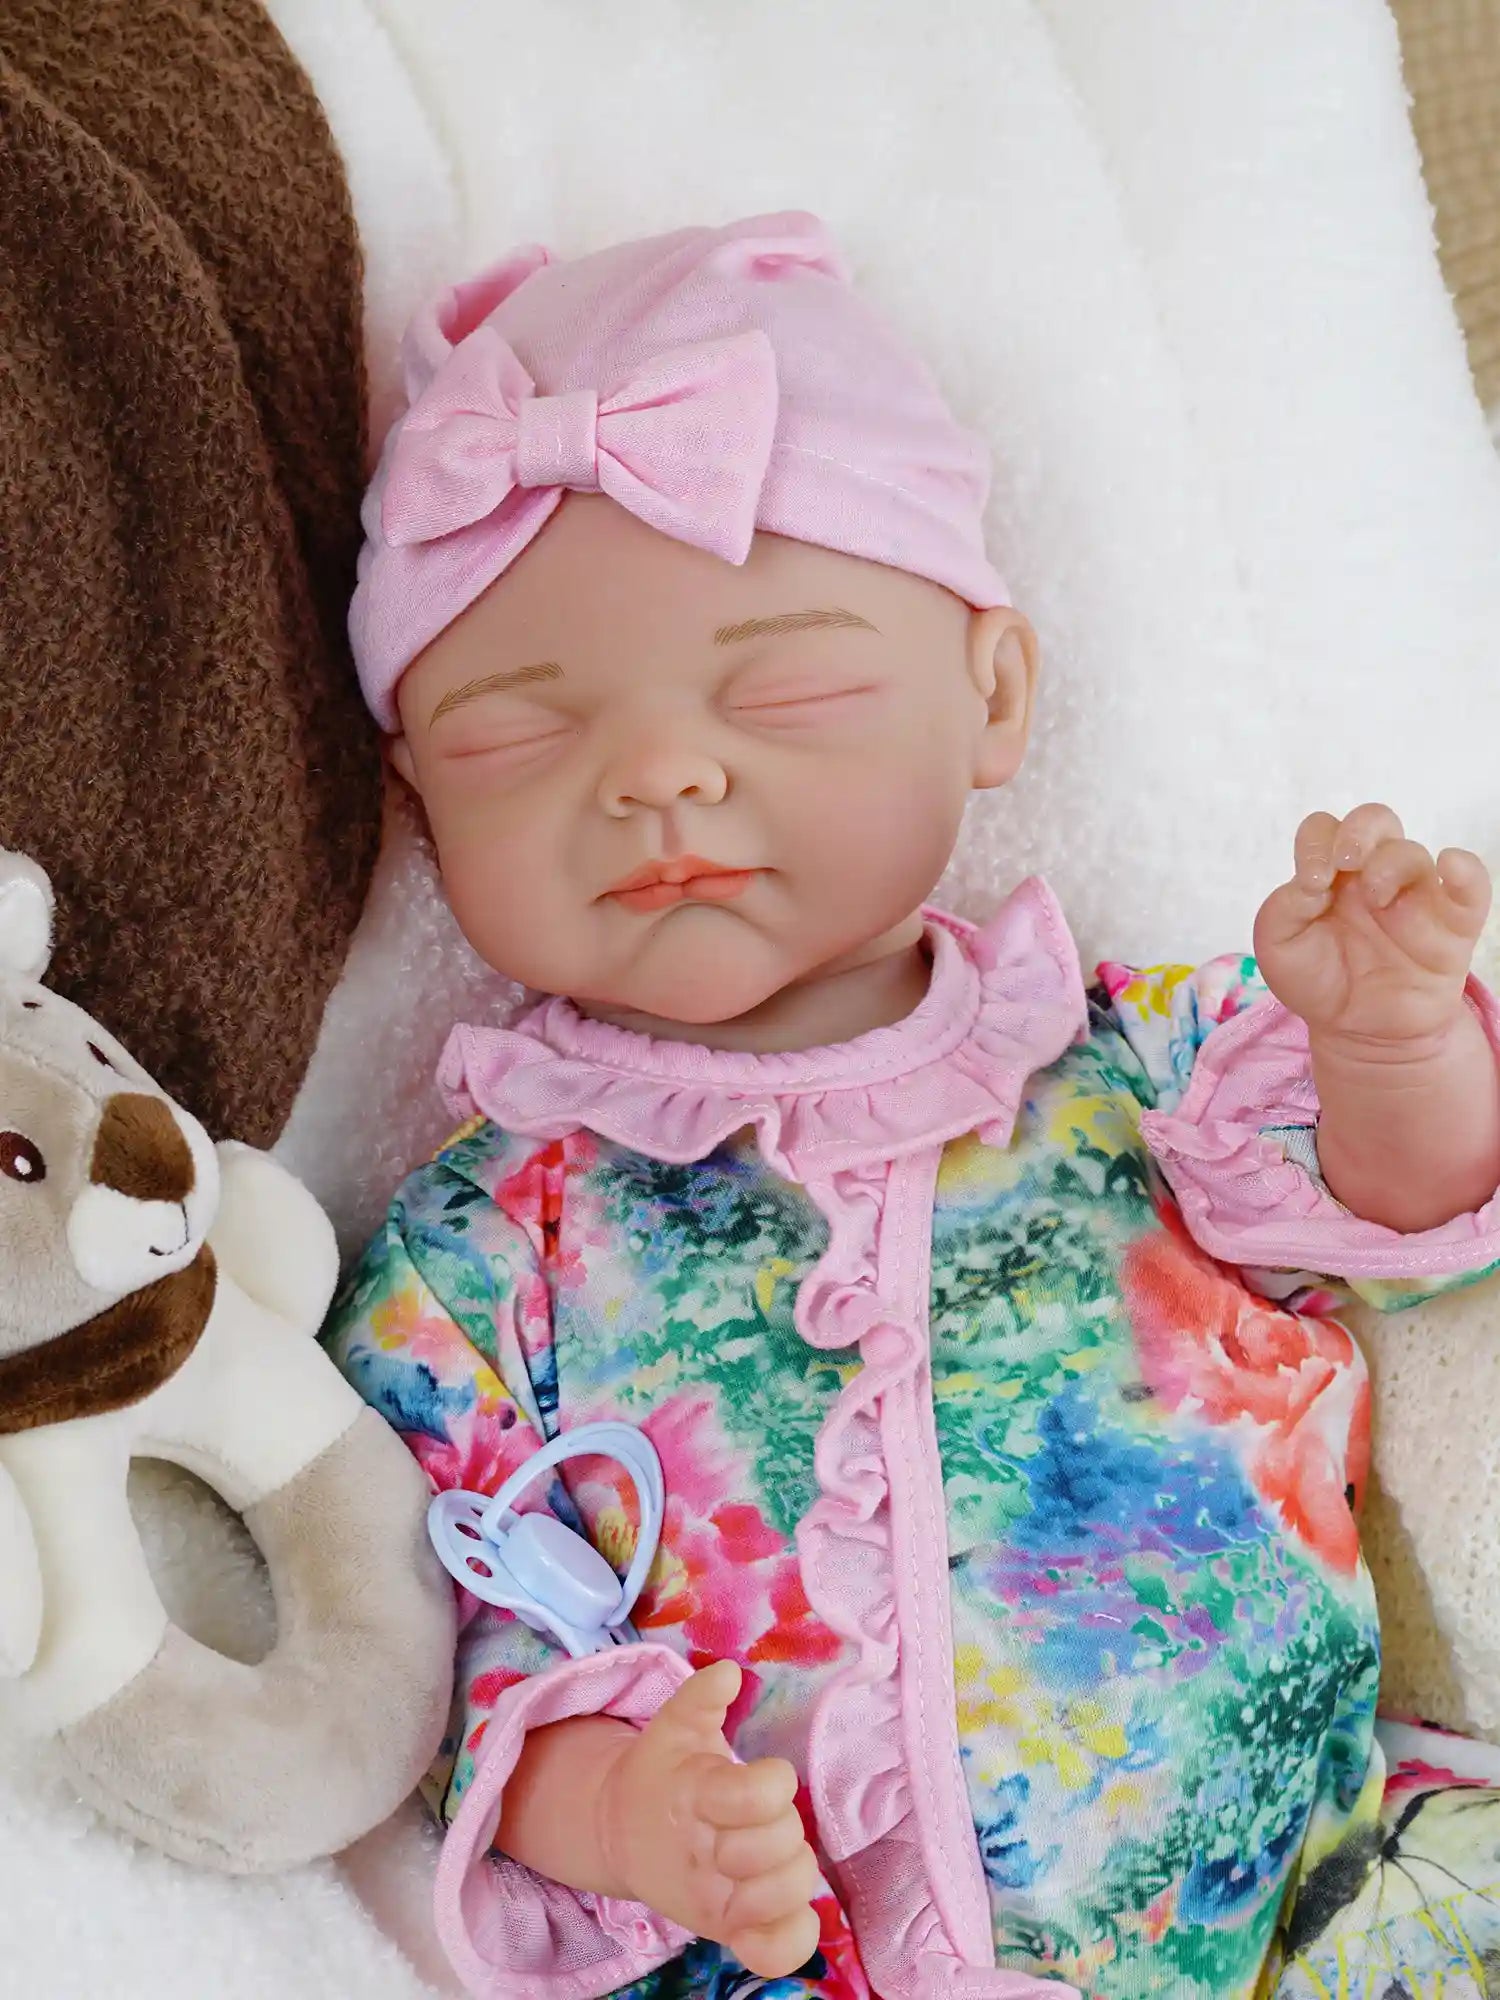 A lifelike reborn baby doll wearing a pink bow headband and a colorful floral jumpsuit lies peacefully with closed eyes, holding a white pacifier in one hand.